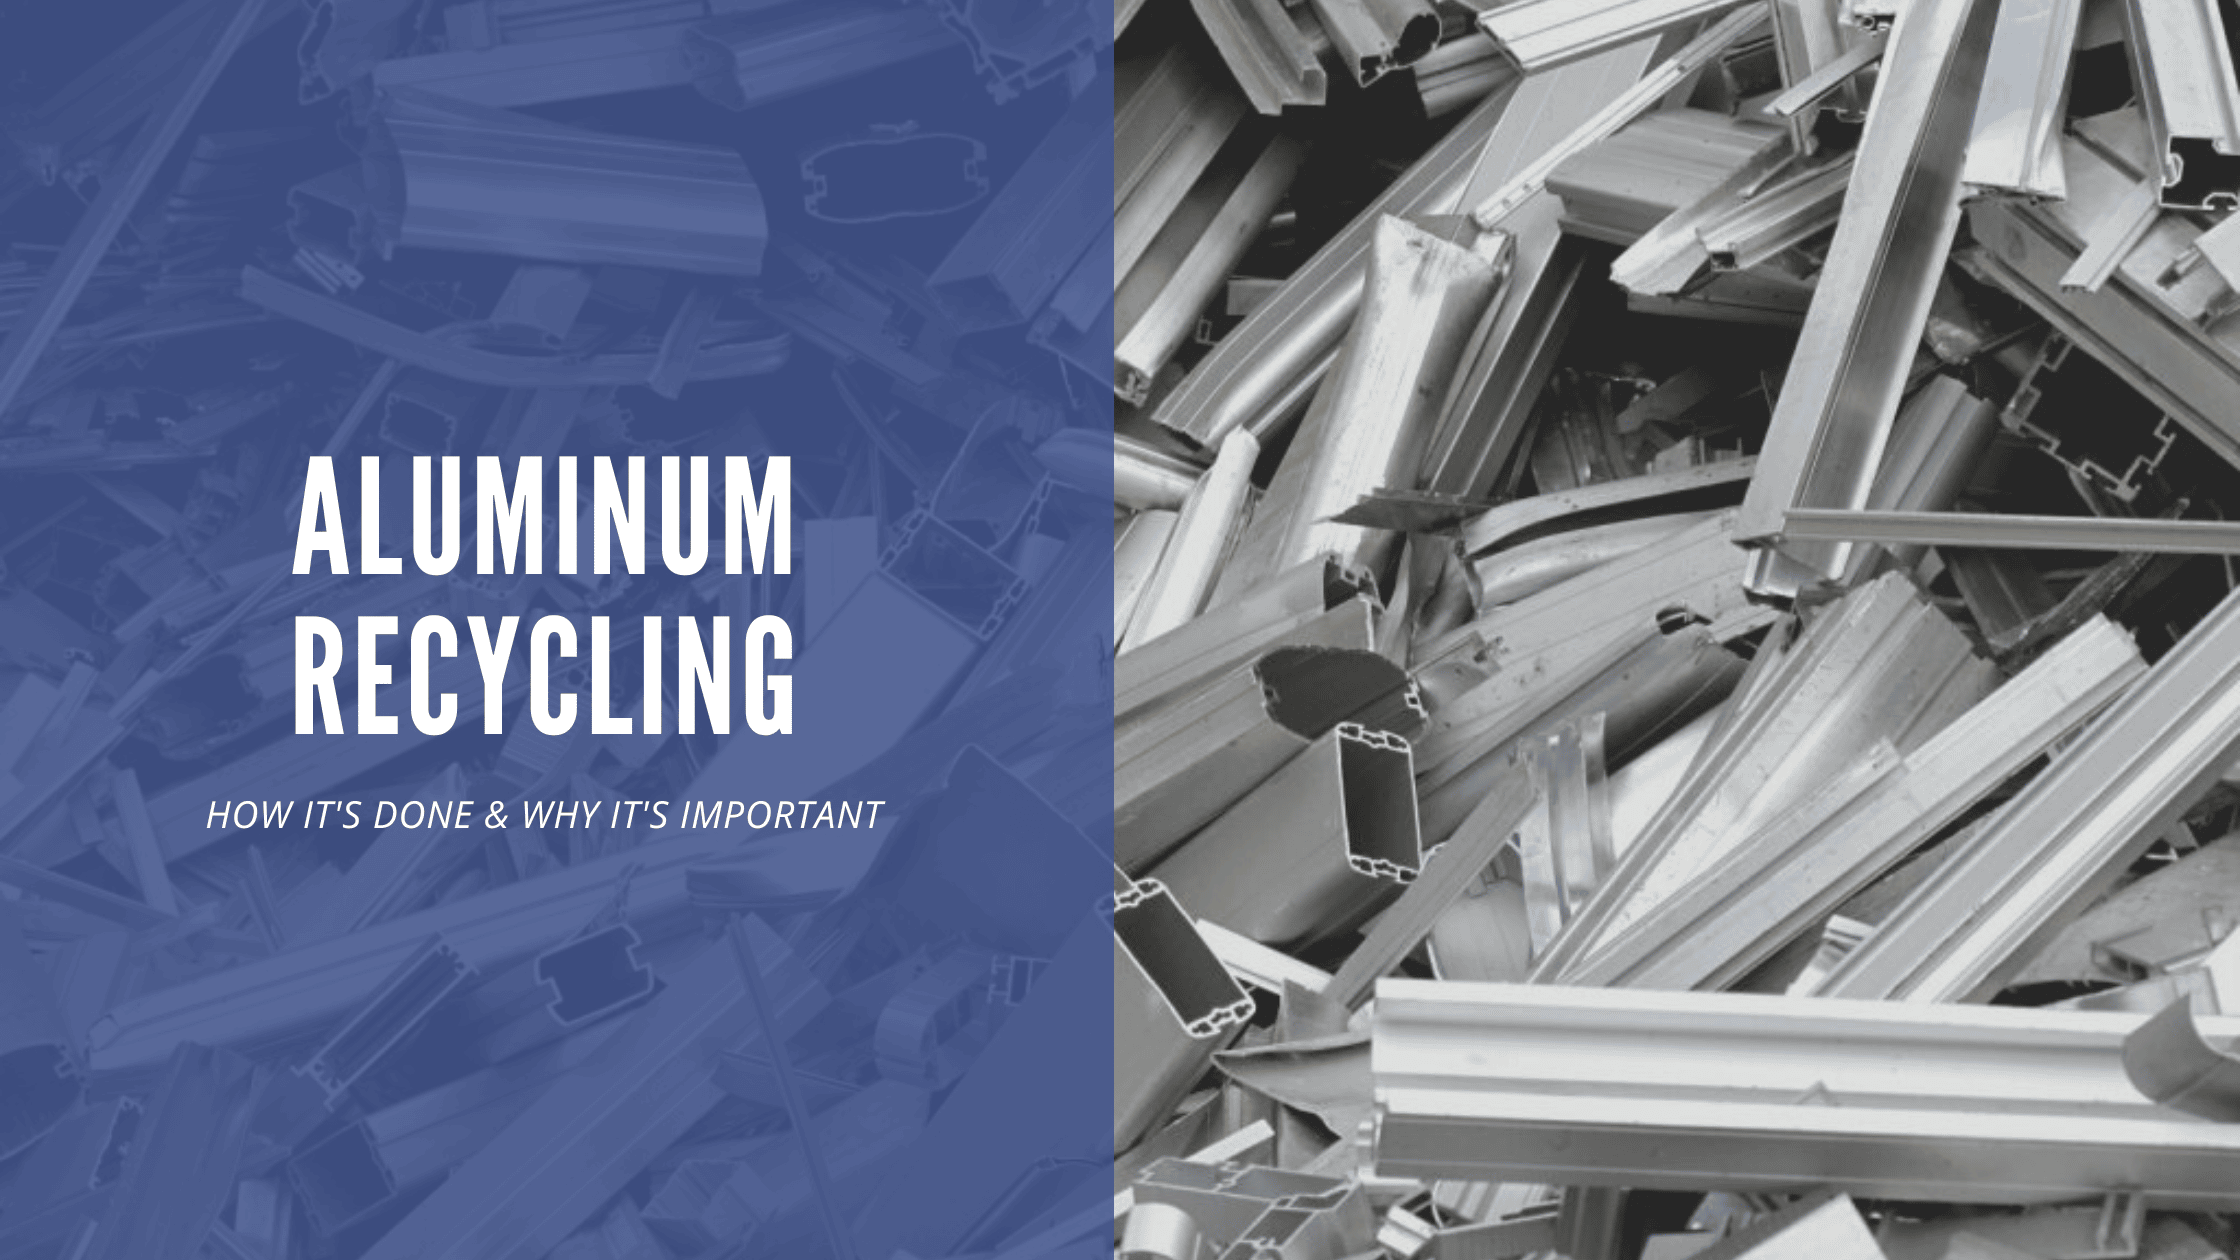 Aluminum recycling – how it’s done and why it’s important